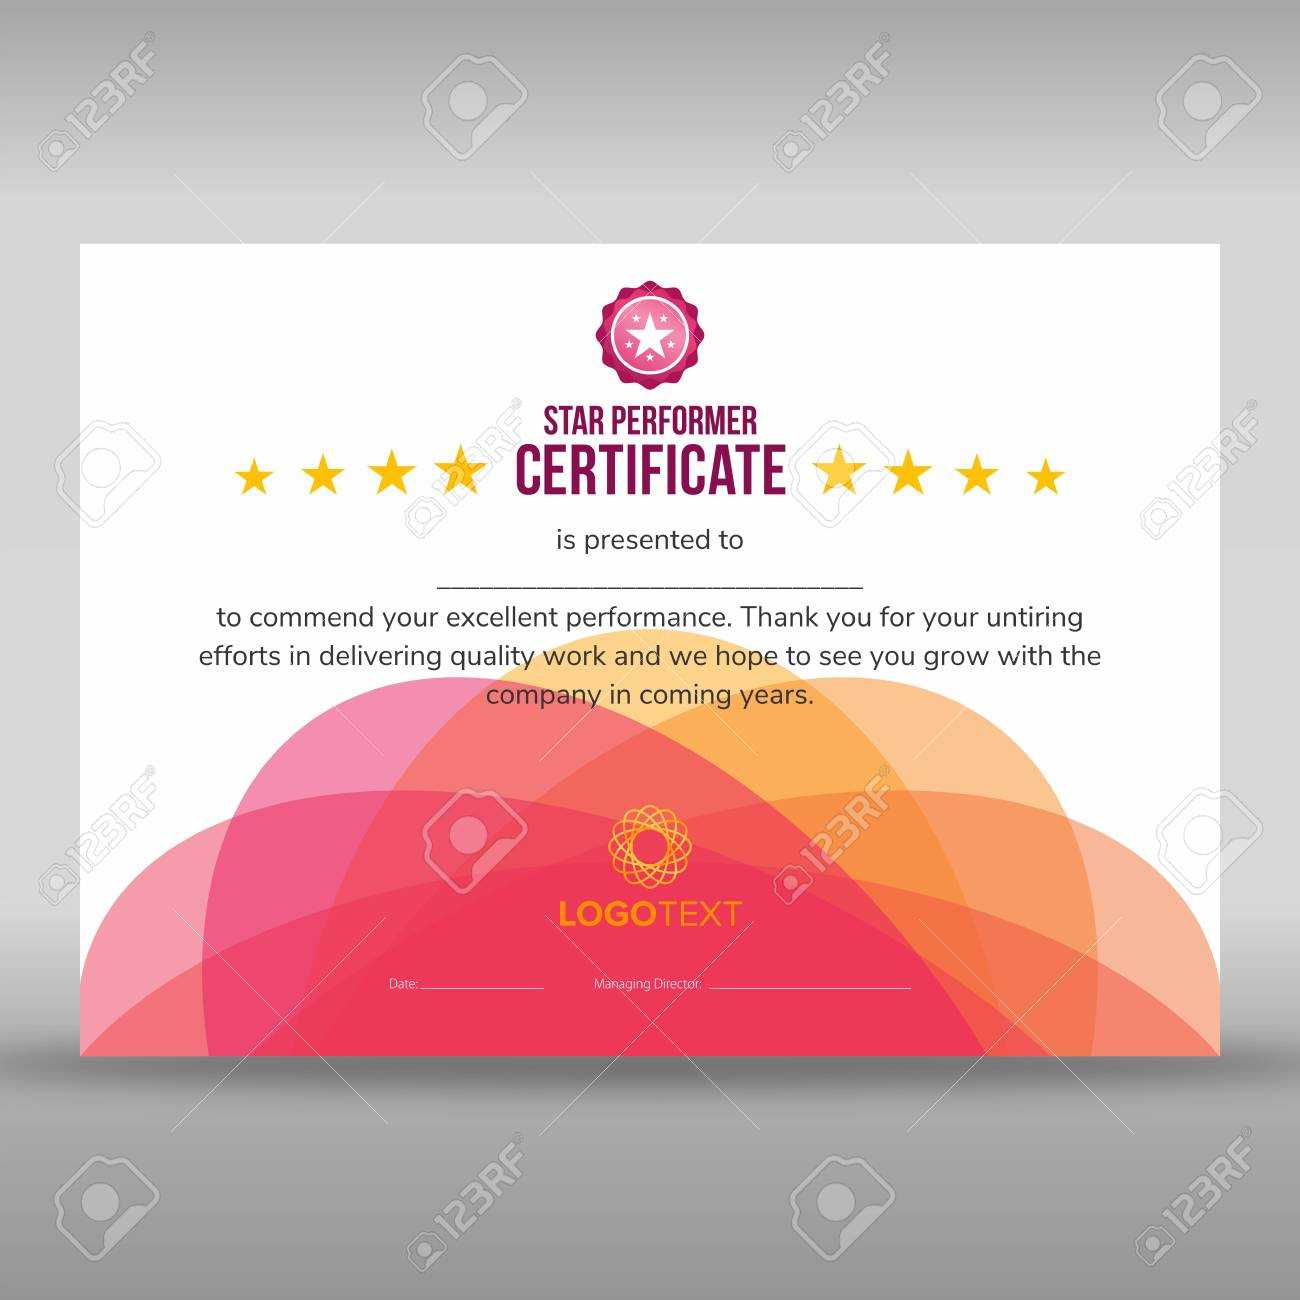 Abstract Creative Pink Star Performer Certificate With Regard To Star Performer Certificate Templates